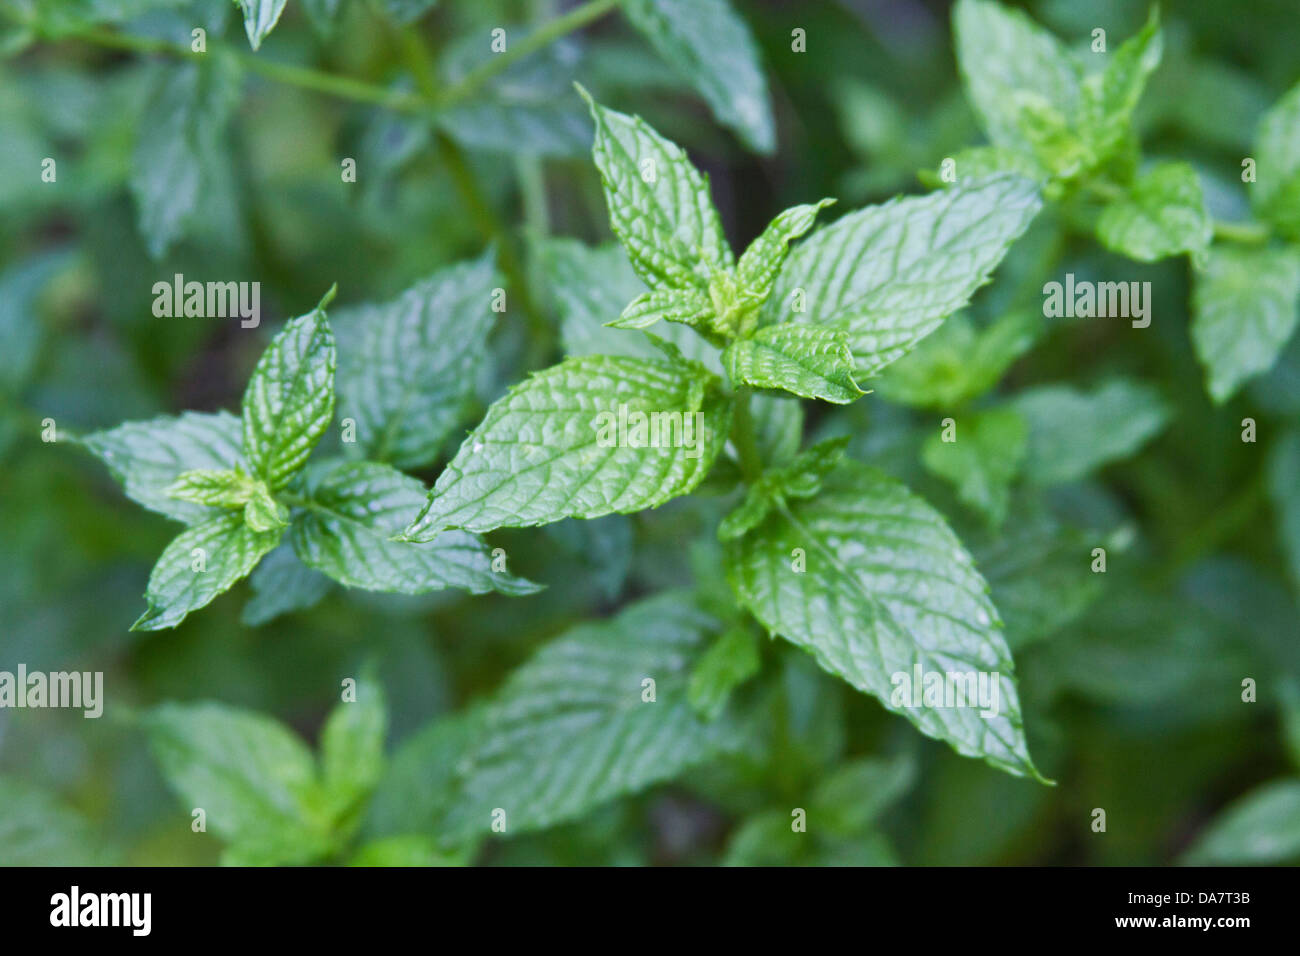 Close up of a branch of vibrant spearmint leaves Stock Photo